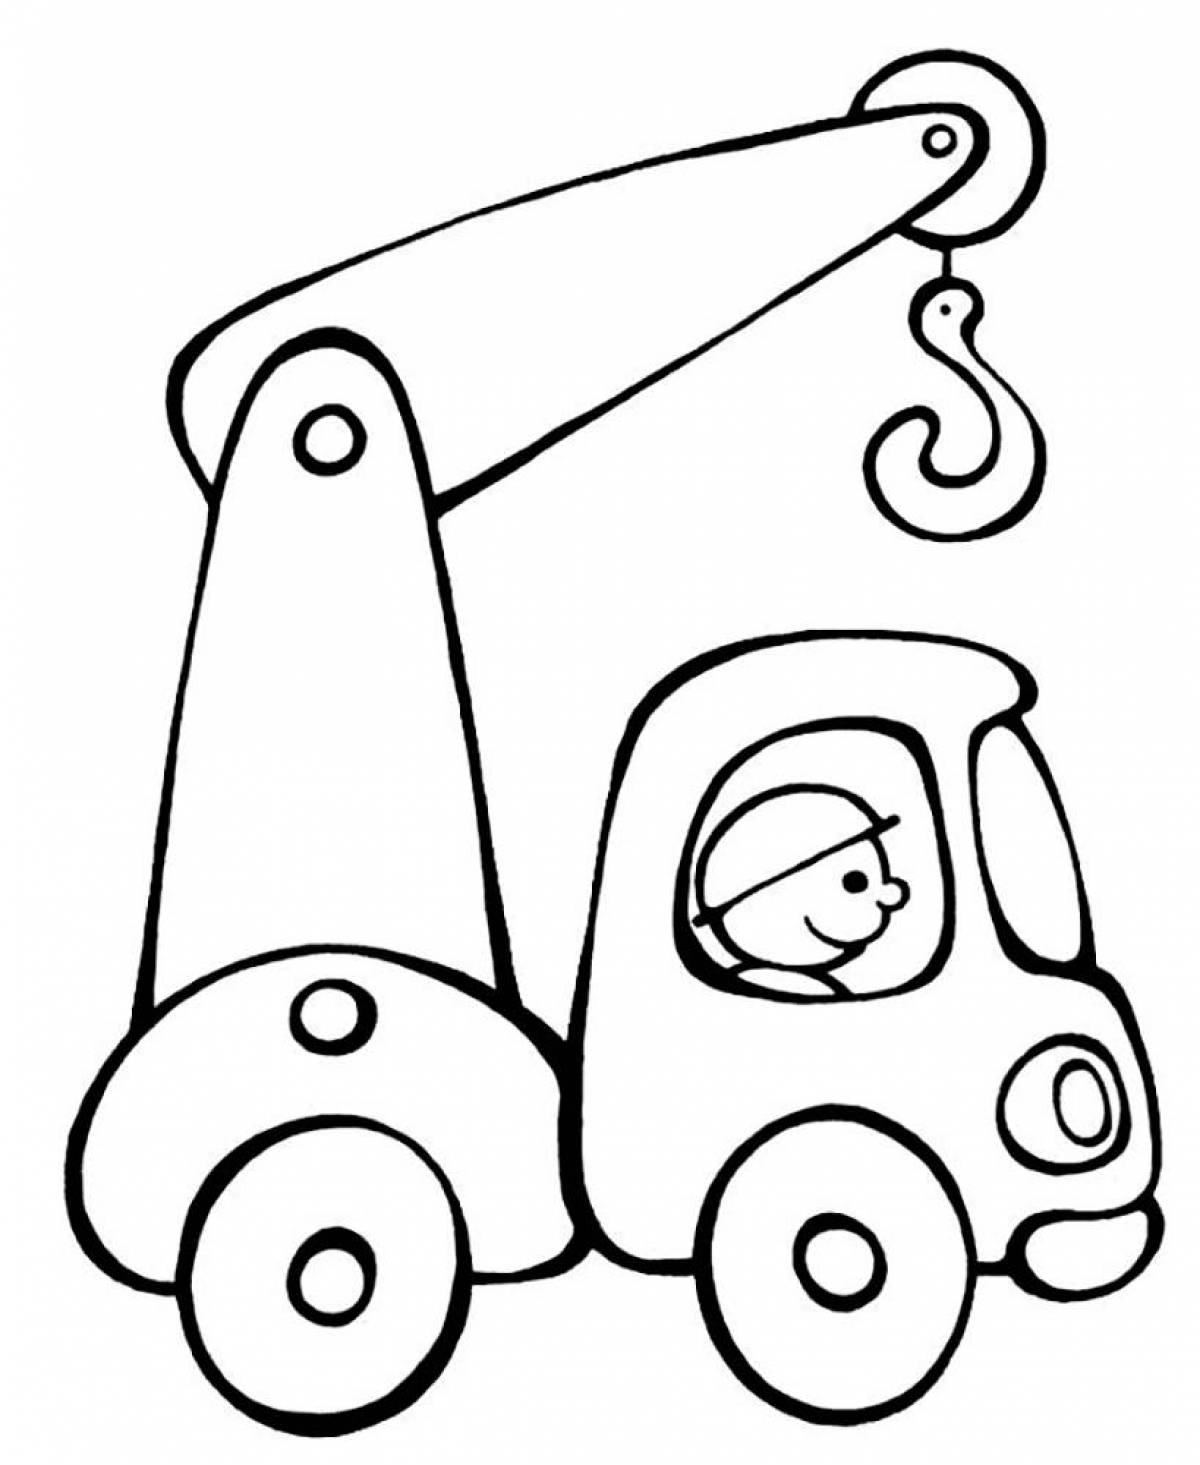 Exquisite car coloring book for 2-3 year olds